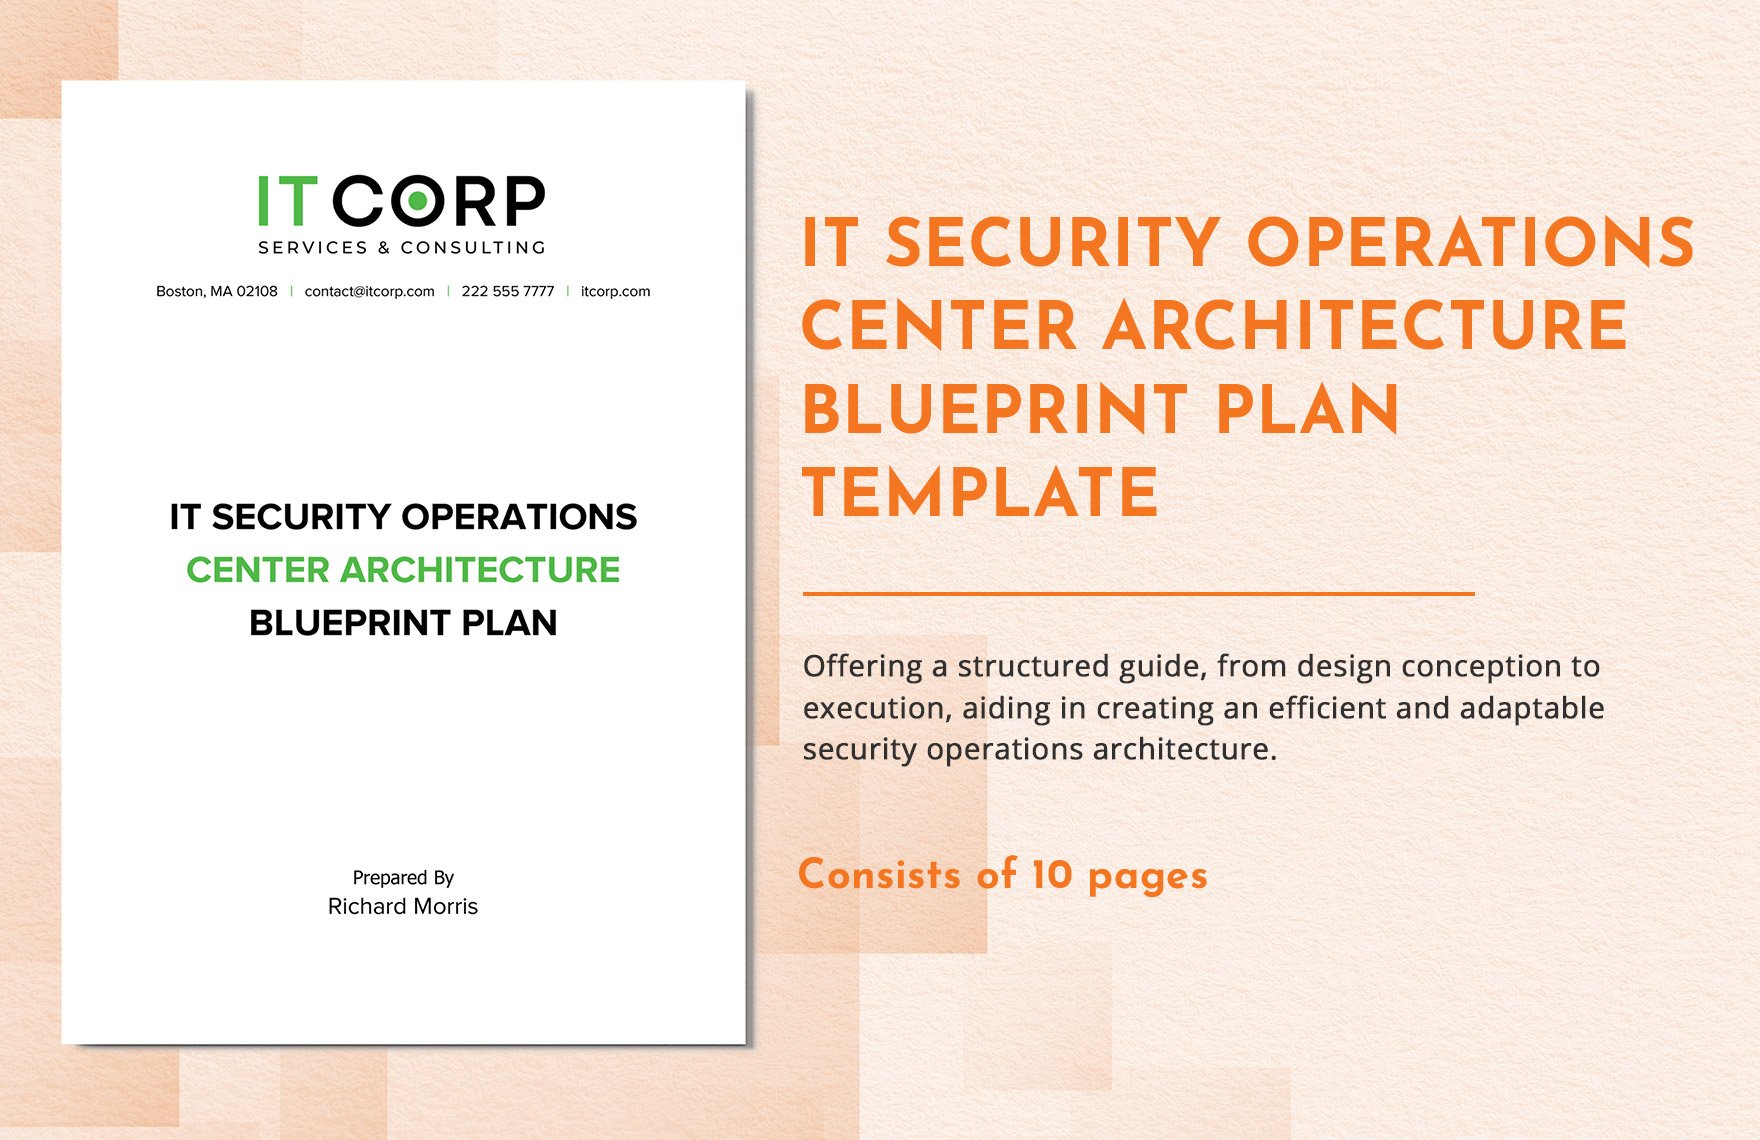 IT Security Operations Center Architecture Blueprint Plan Template in Word, Google Docs, PDF